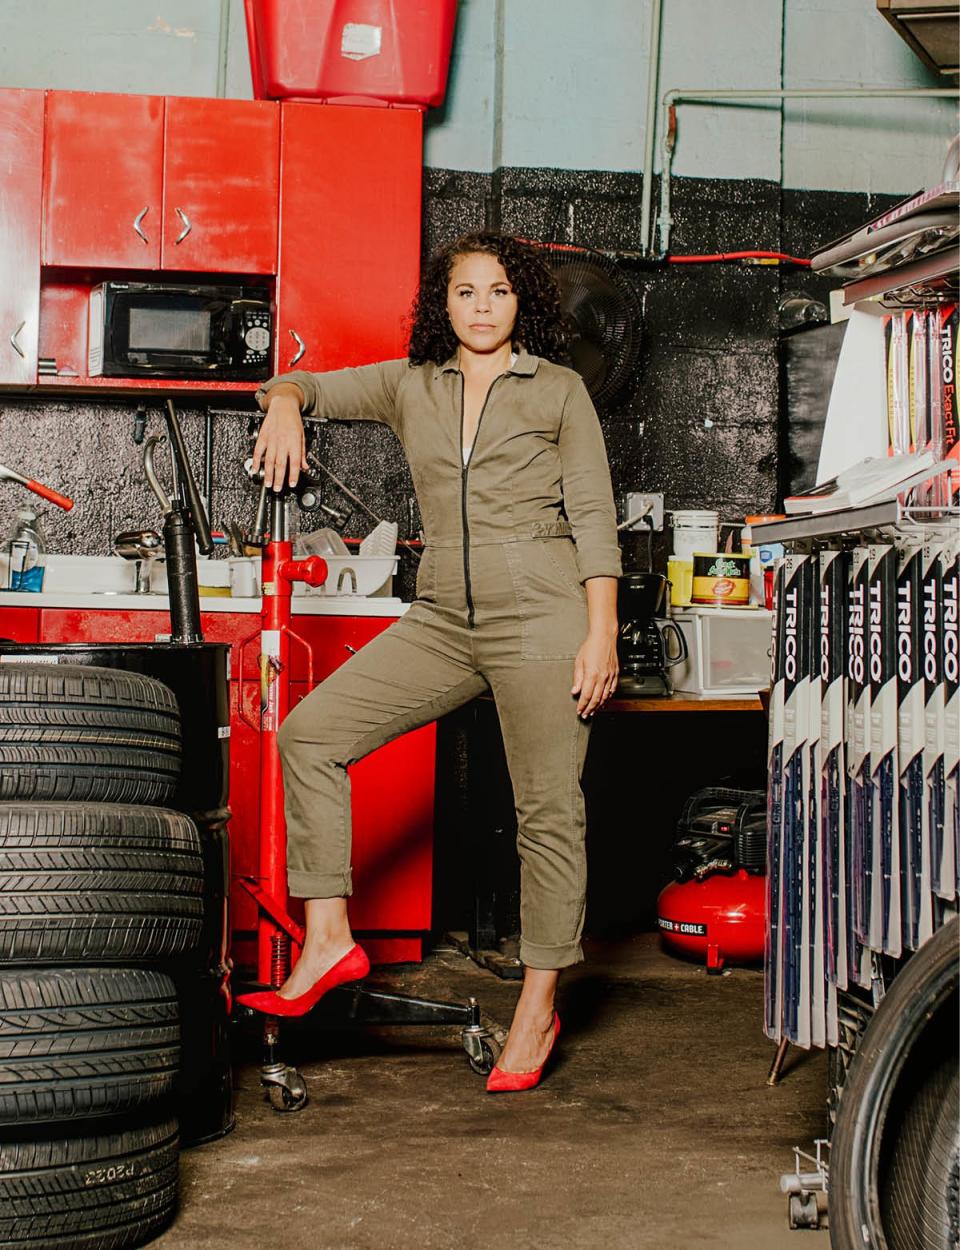 Ms. Fix-It Patrice Banks, owner of Girls Auto Clinic in Upper Darby, Pennsylvania, photographed in the car-repair shop.